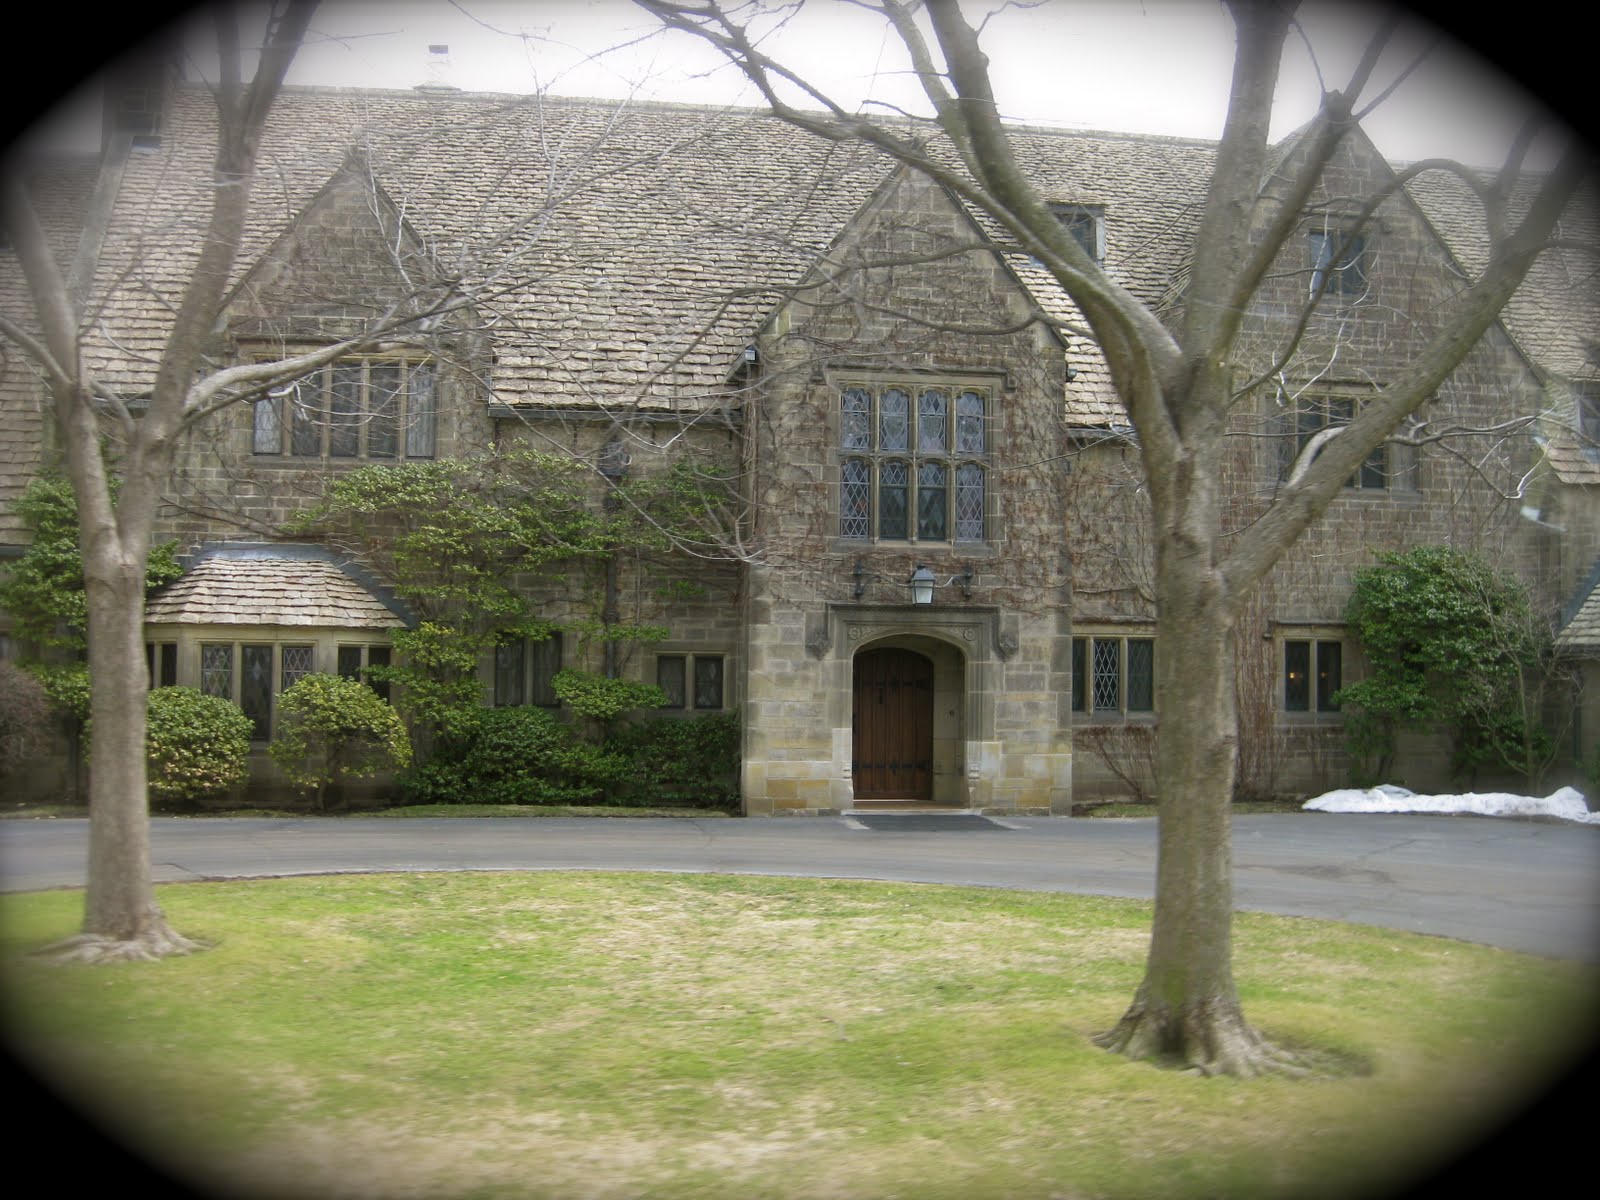 When was the edsel ford house built #2